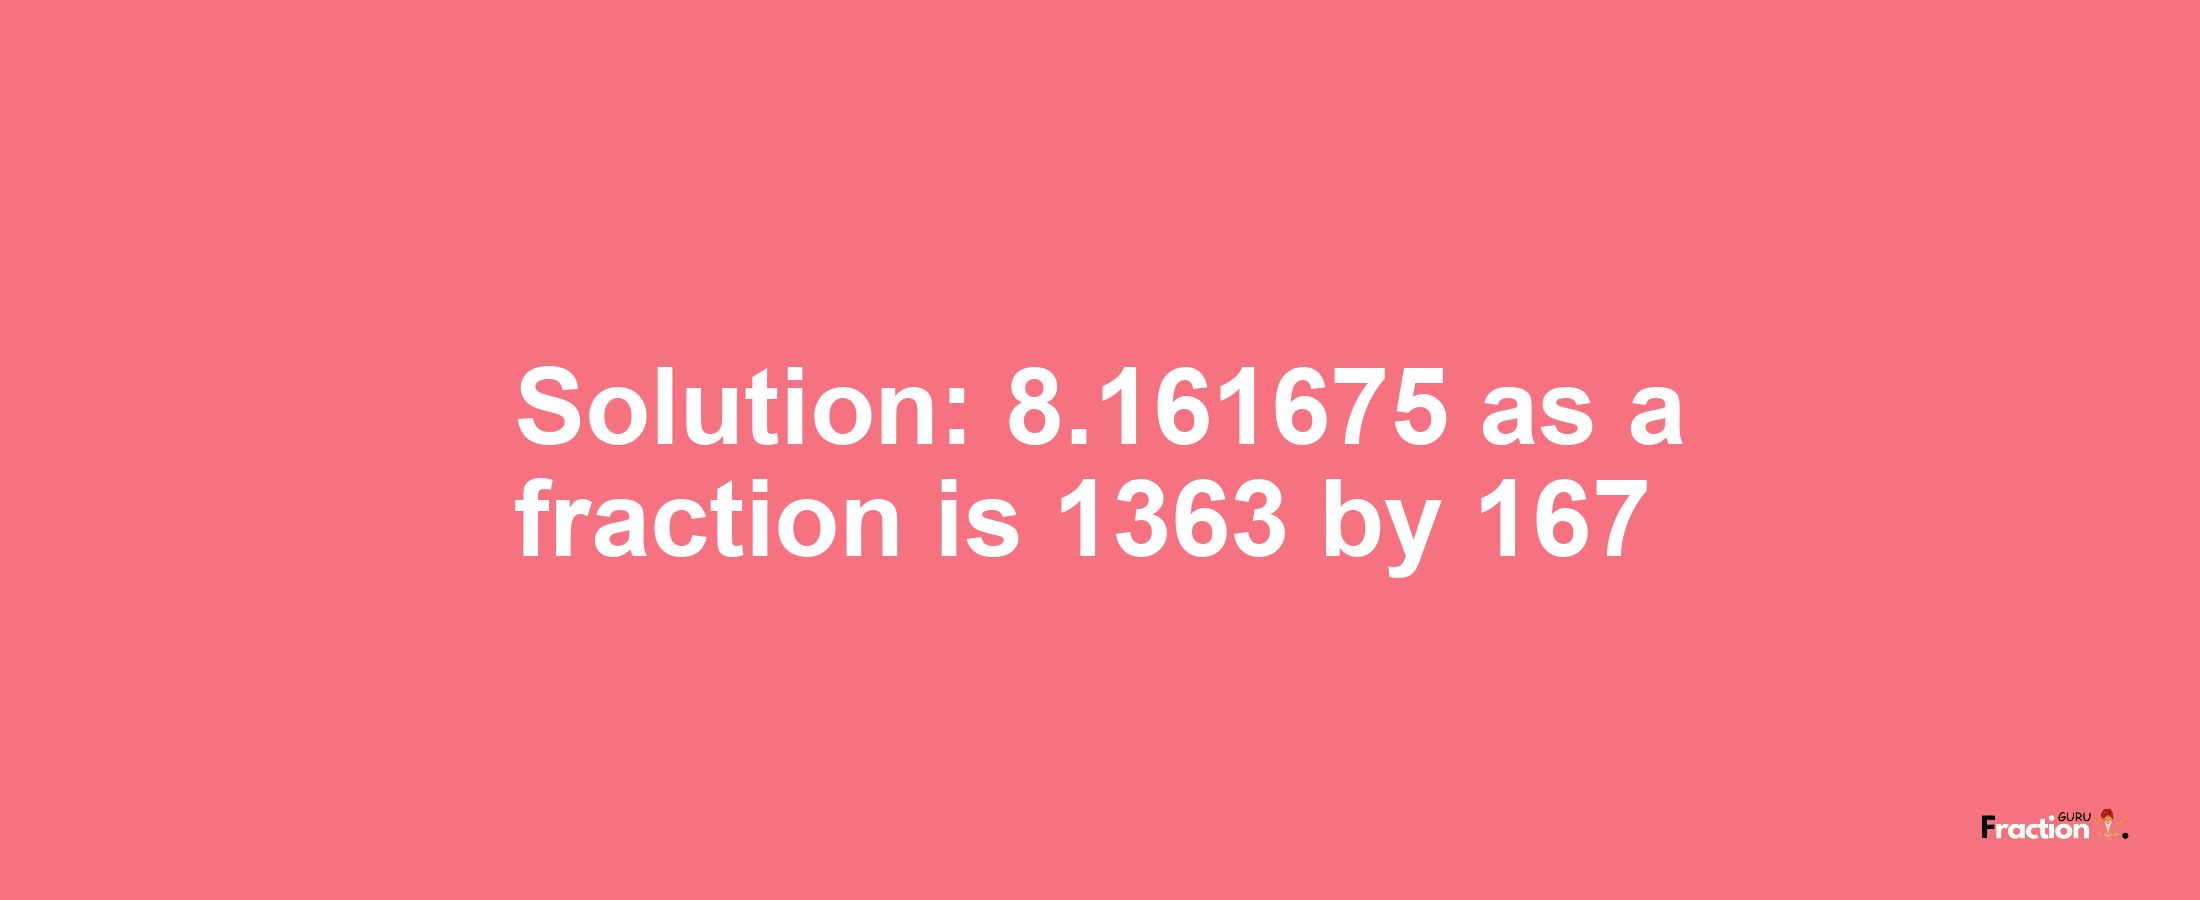 Solution:8.161675 as a fraction is 1363/167